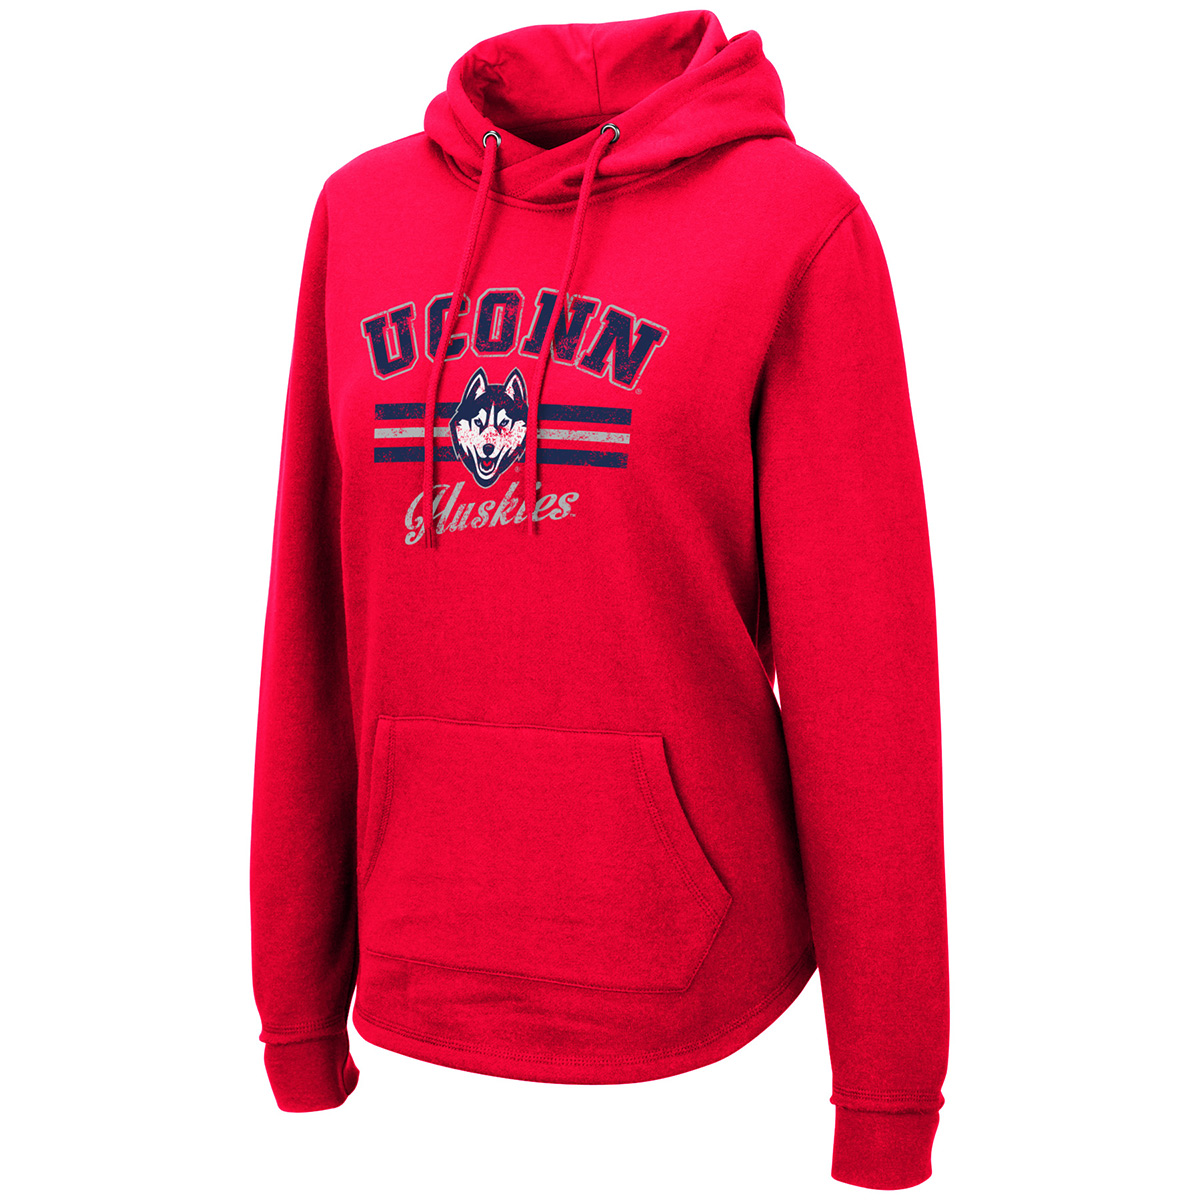 Uconn Women's Crossover Hoodie - Red, L